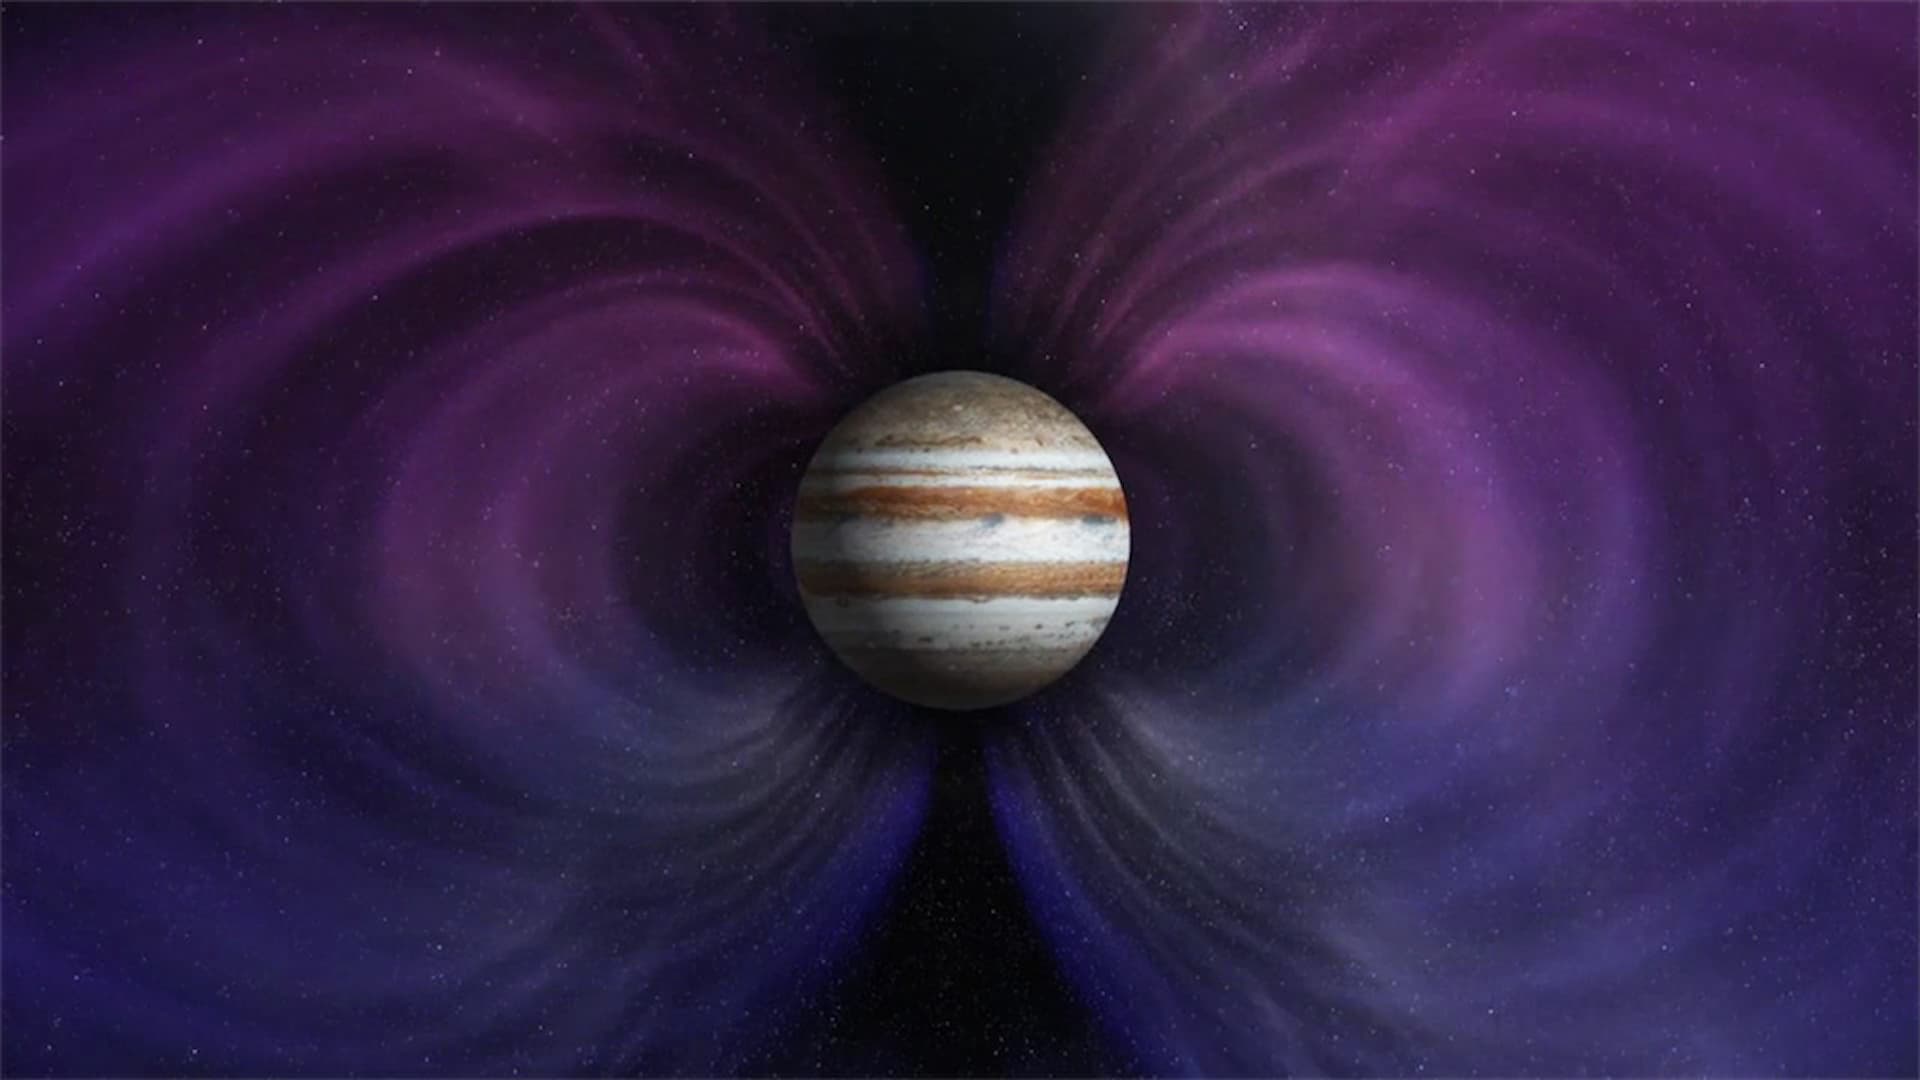 More ASI: Jupiter’s radiation belts: an astrophysical particle accelerator in our neighborhood